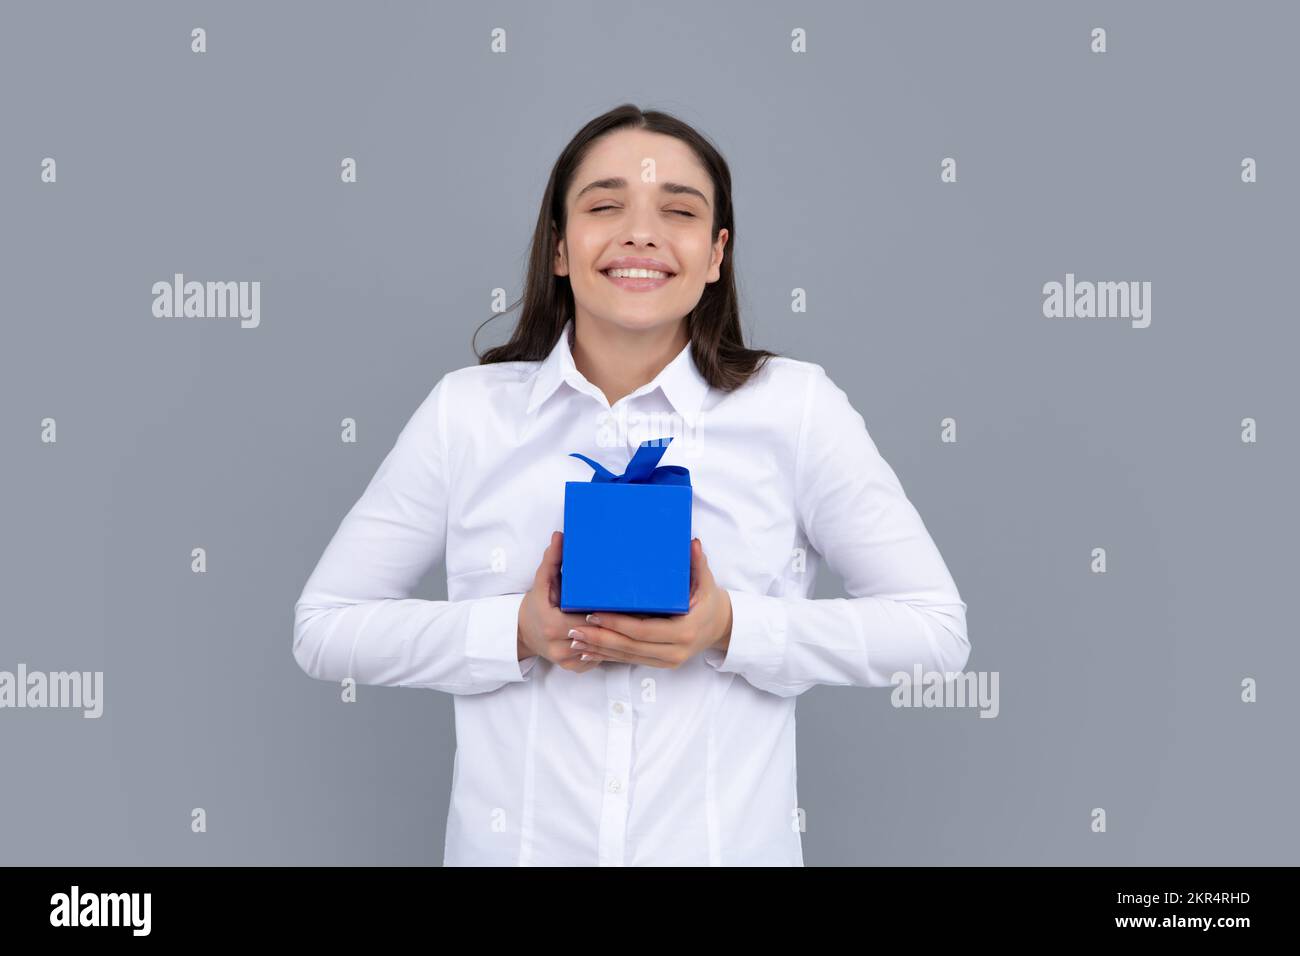 Happy birthday. Woman holding gift box with ribbon. Studio portrait over gray background. Stock Photo